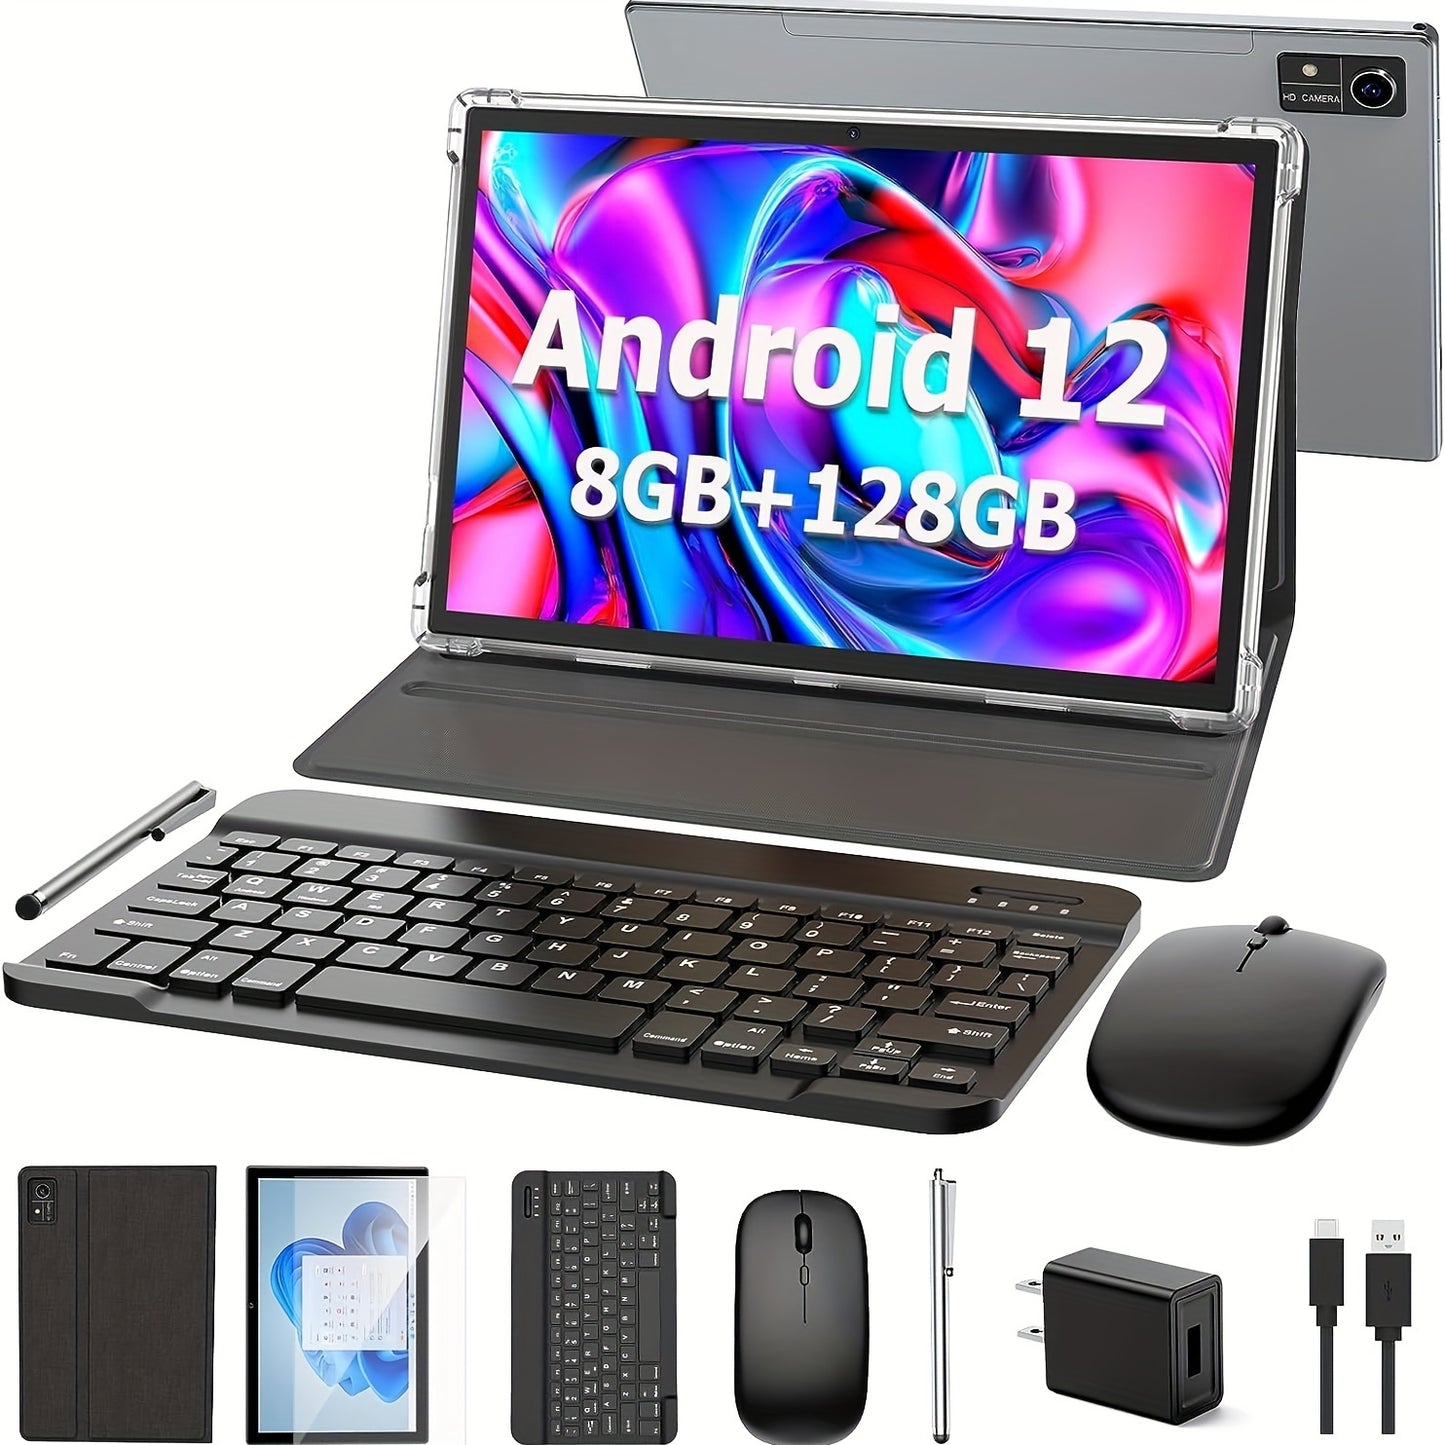 Android Tablet 10 Inch, Android 13 Tablet, 8GB RAM 128GB ROM, 1TB Expand, 5G WiFi, 4G/LTE, Wireless, 8000mAh Battery, GMS Certified, 2 In 1 Tablet With Keyboard, Mouse, Case, Stylus - Rexpect Nerd